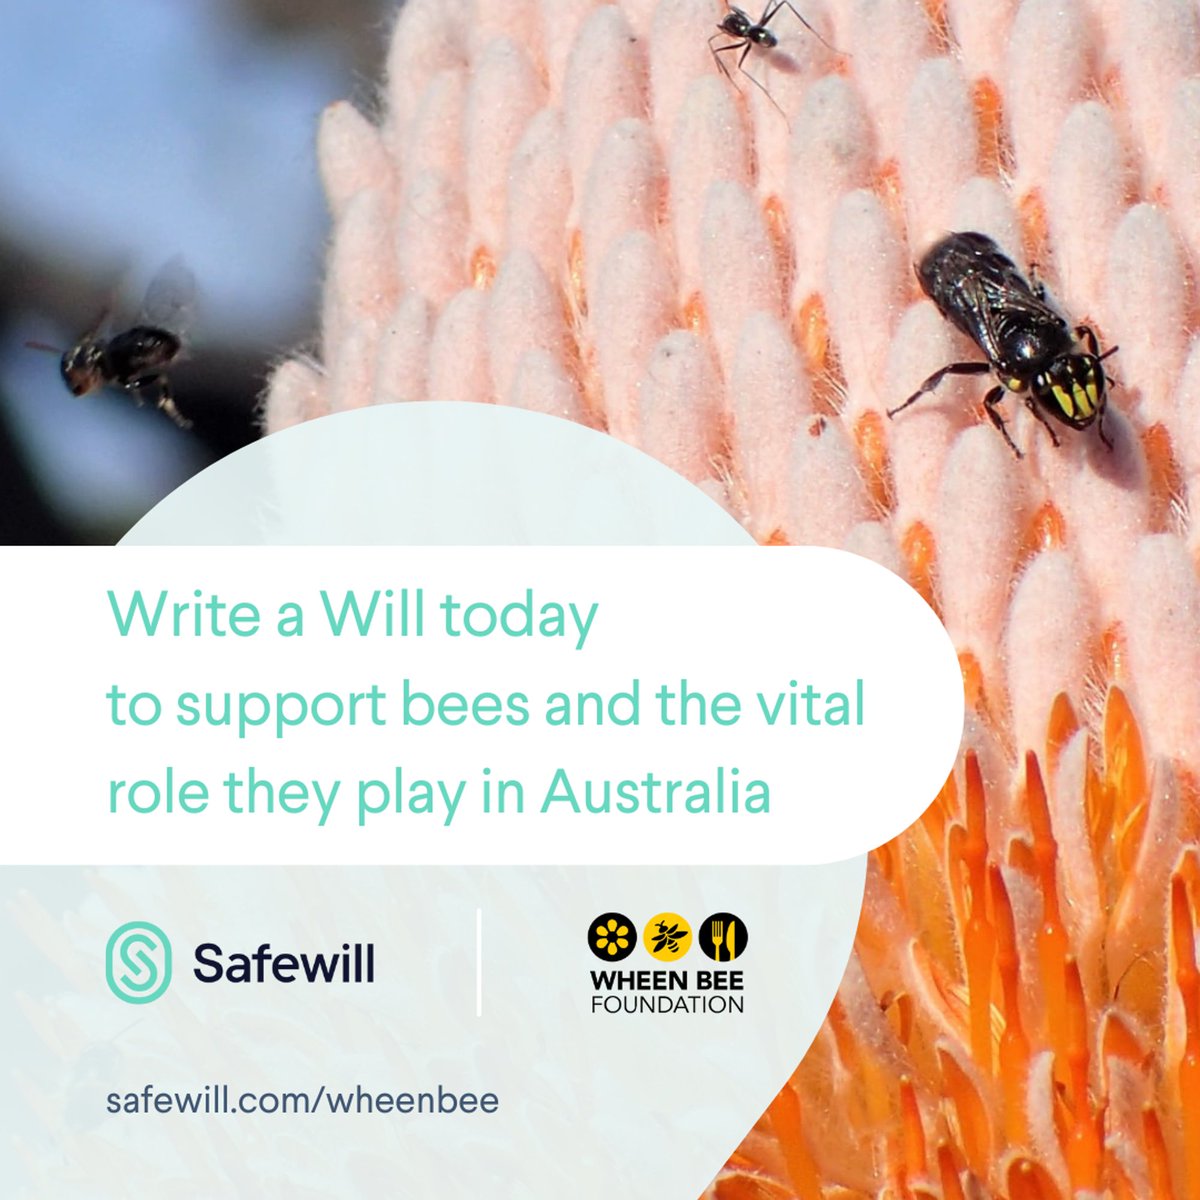 We've partnered with Safewill to offer our supporters 50% off Safewill's Will-writing service. By leaving a gift to Wheen Bee Foundation in your Will, you can help fund vital research projects that protect bees and their environment. Write a Will at bit.ly/3ThciG1